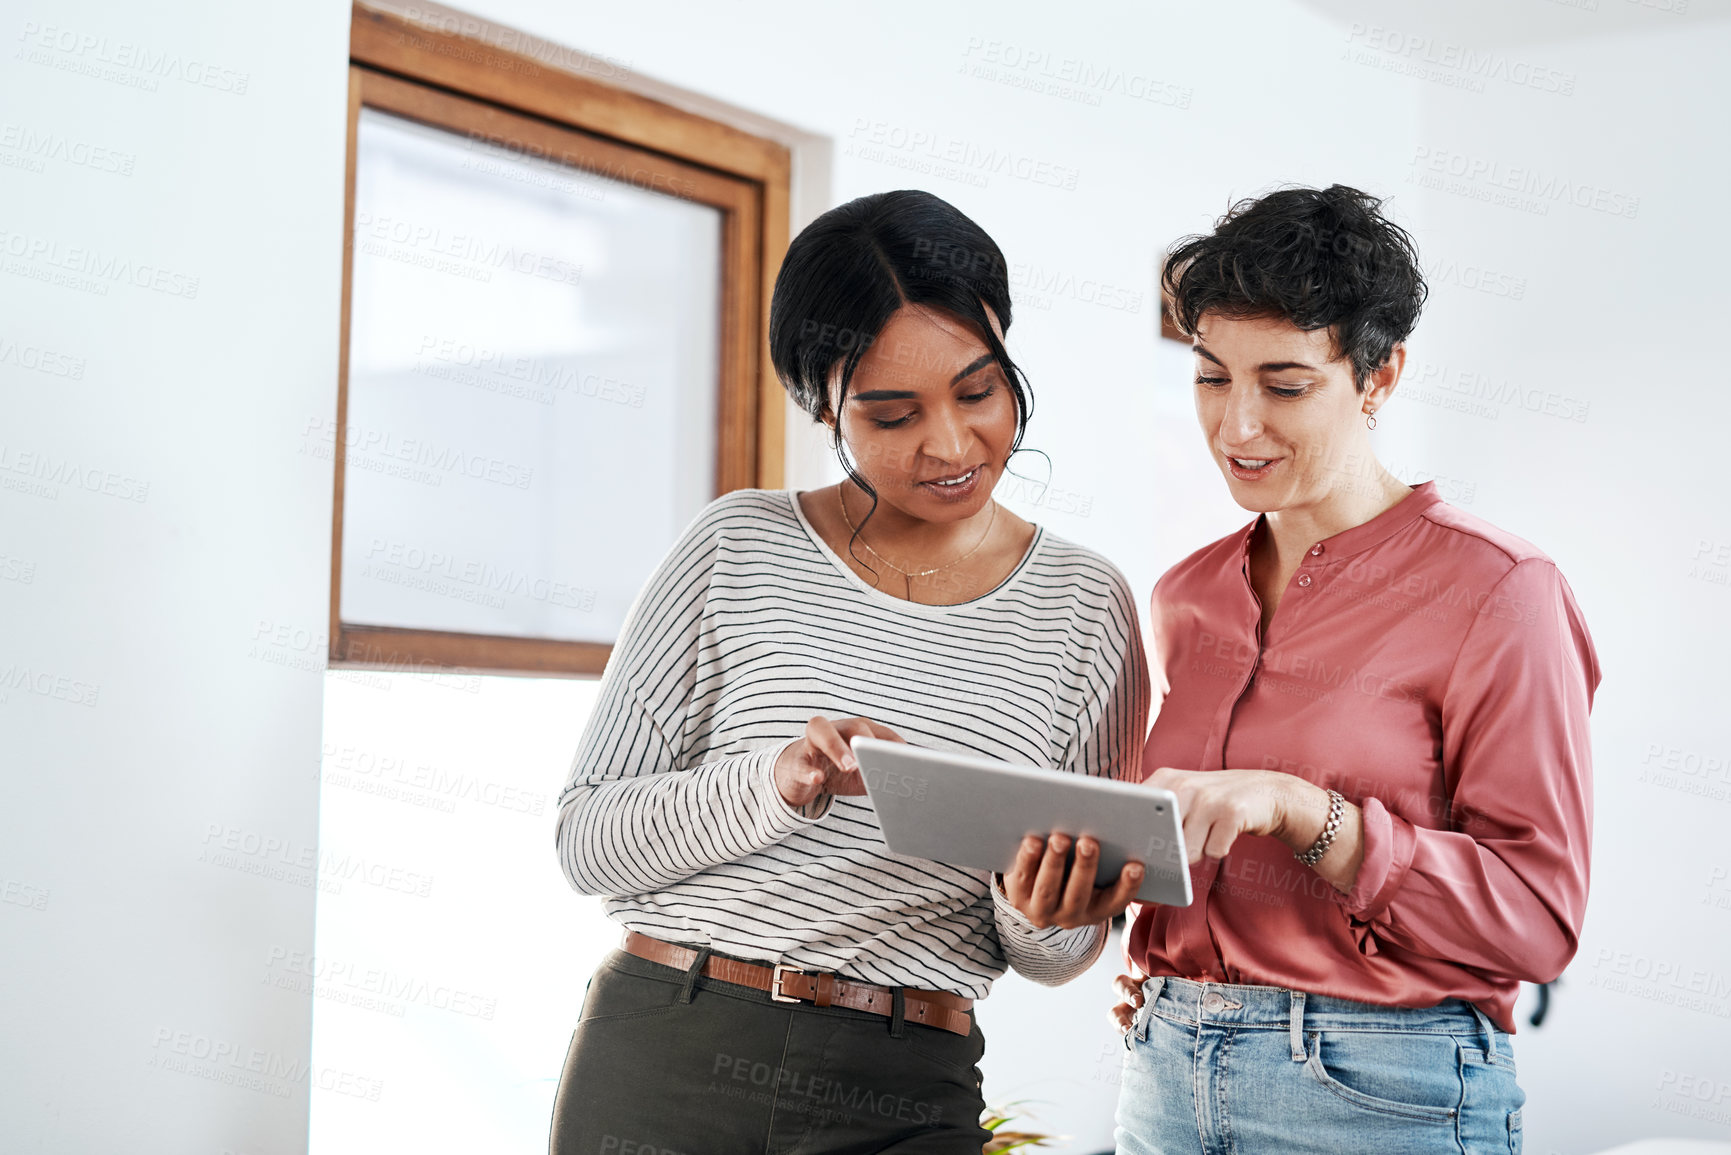 Buy stock photo Cropped shot of two attractive young businesswomen standing together in the office and using a tablet